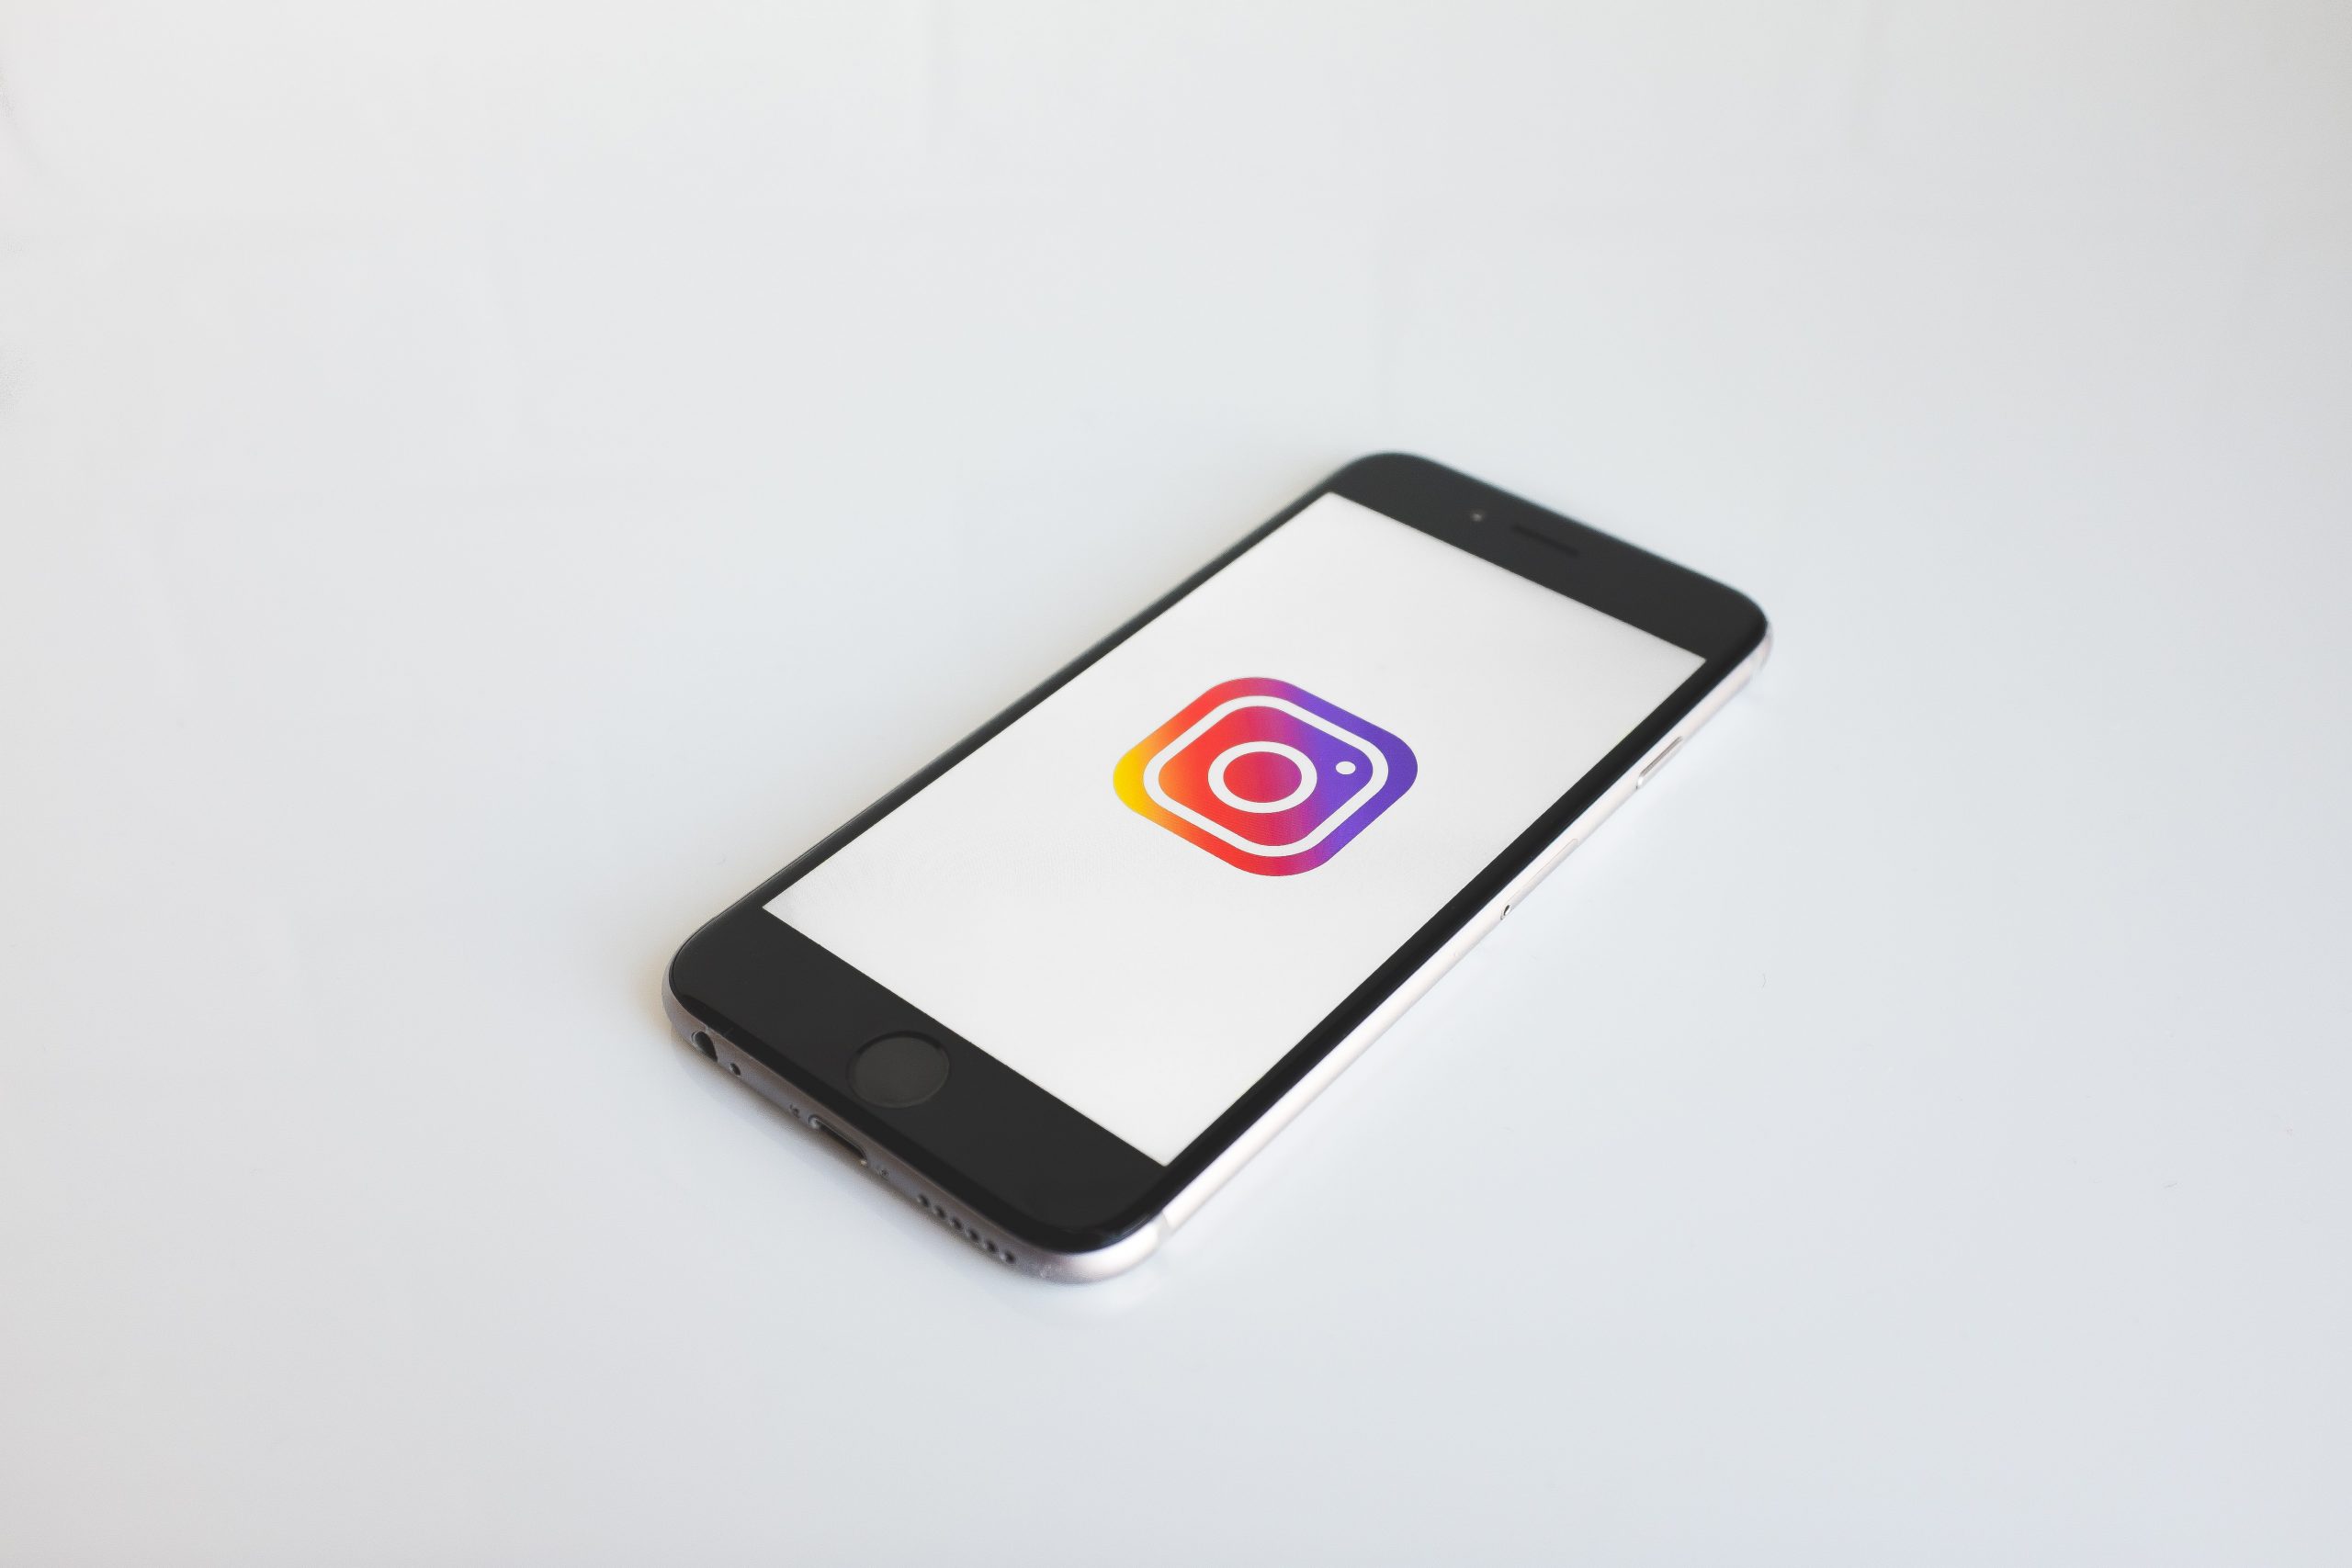 Step-by-step guide to starting with Instagram